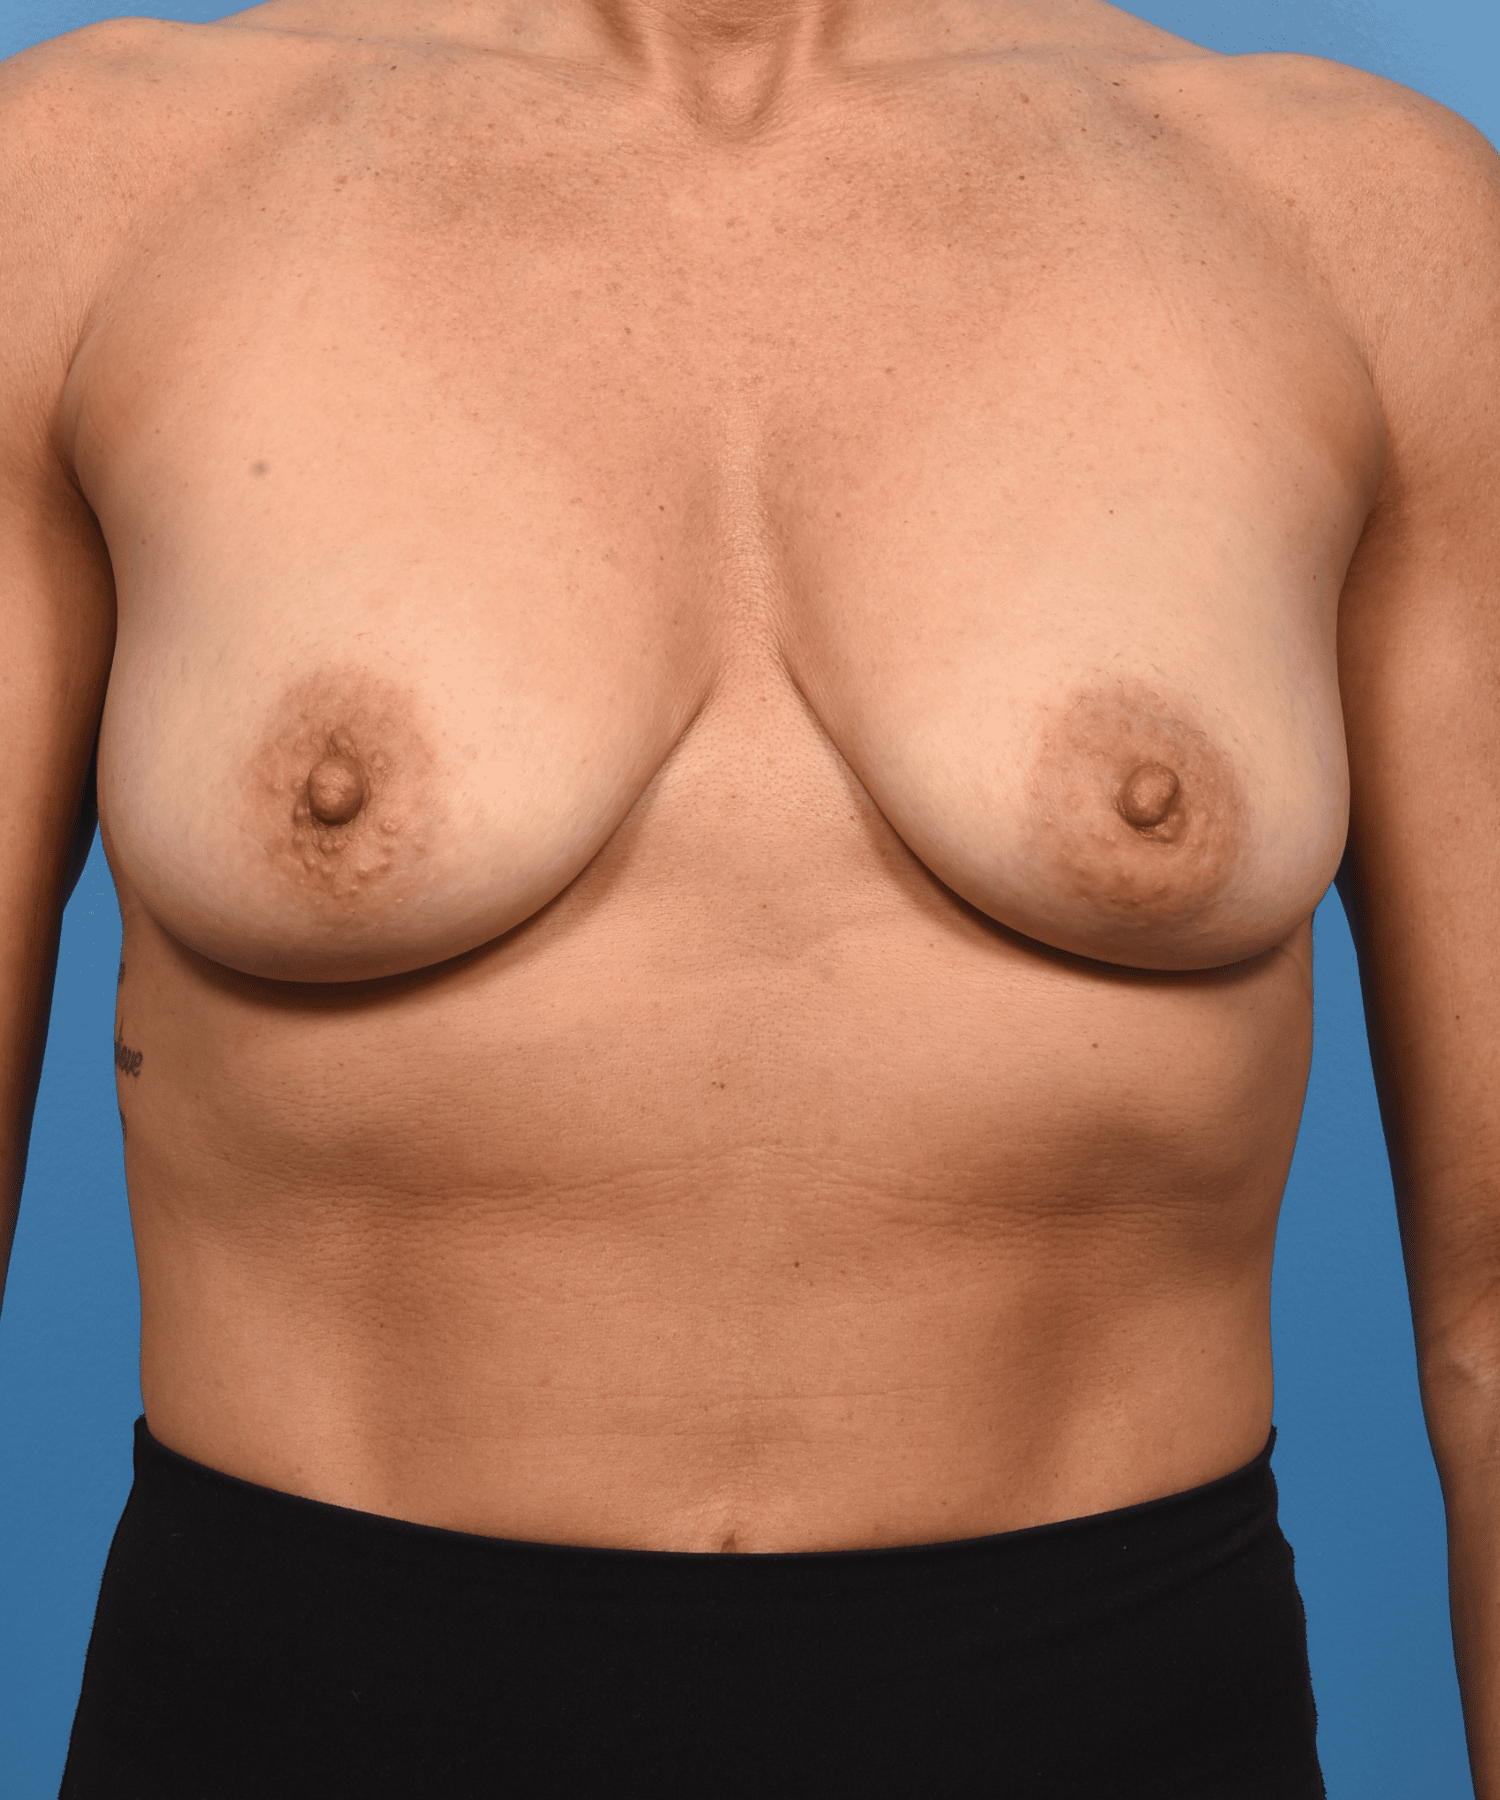 Breast Enhancement With Silicone Round “Gummy” Implants & Mastopexy (lift)